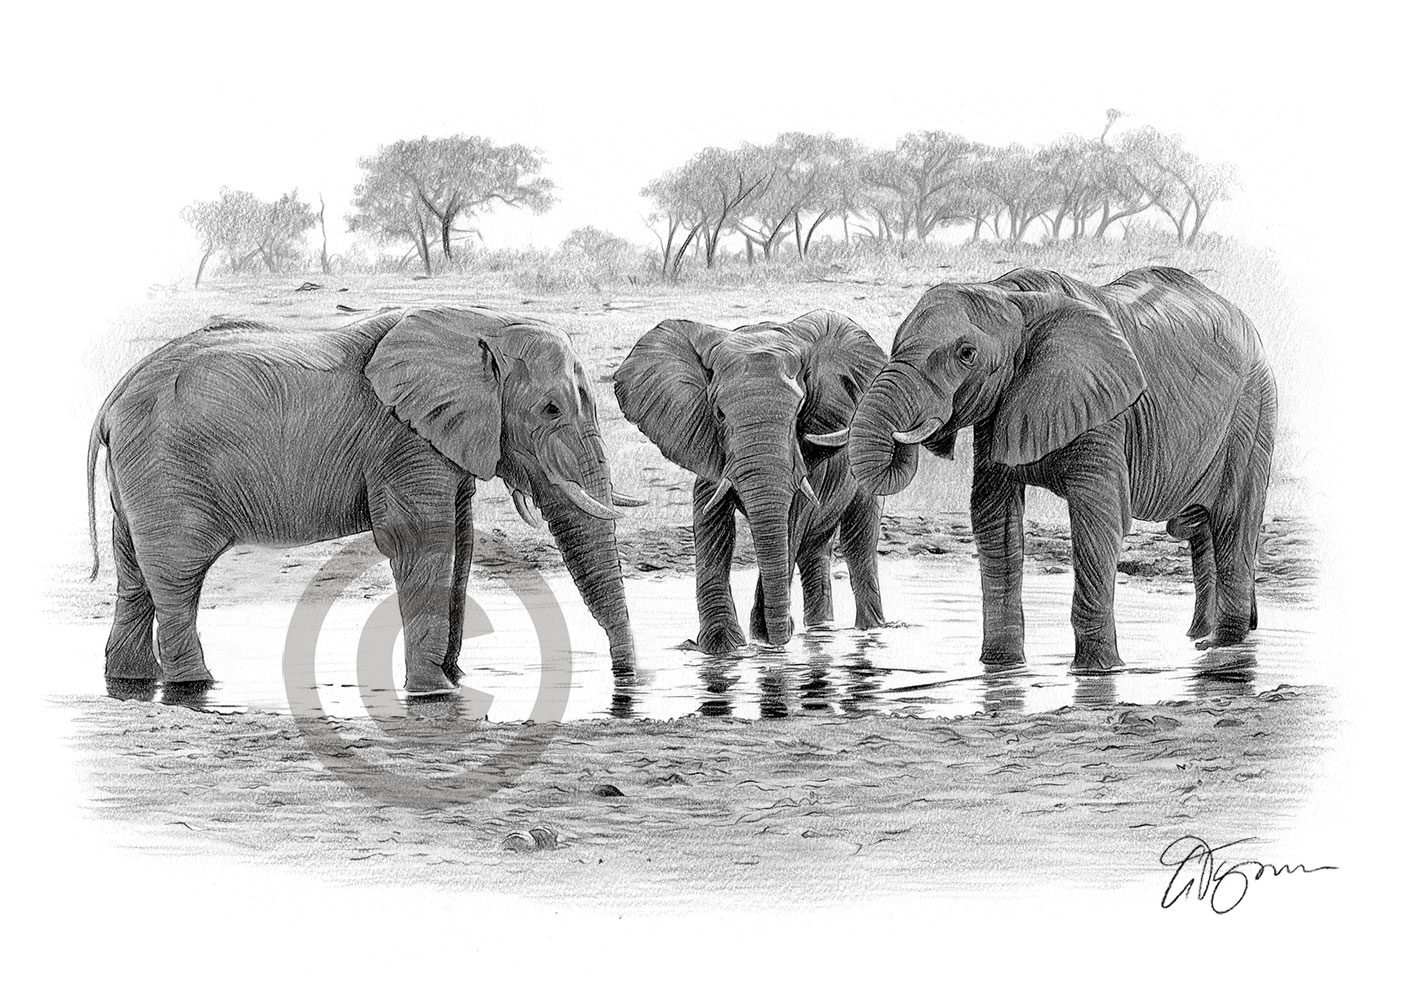 Pencil drawing of a group of elephants at a waterhole by artist Gary Tymon